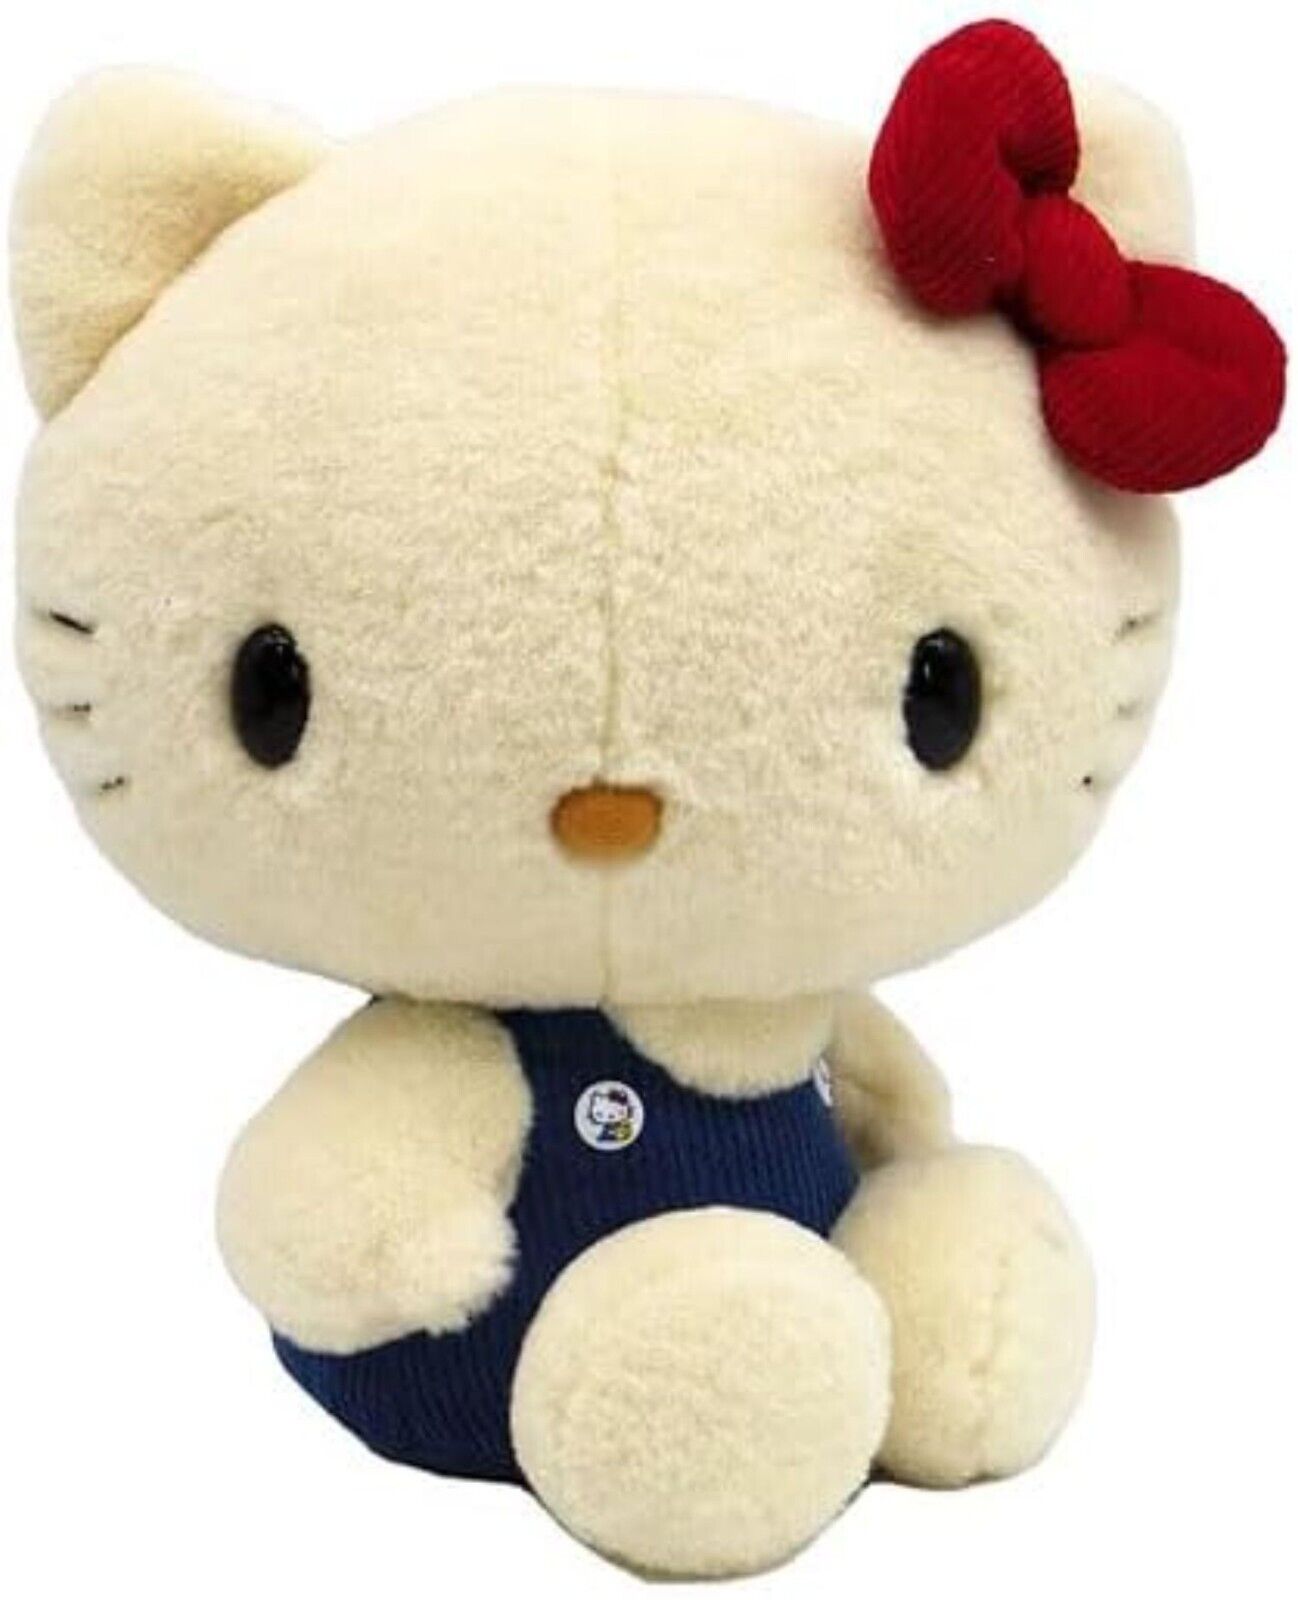 Sanrio Character Hello Kitty Stuffed Toy M Size Classic Plush Doll New Japan